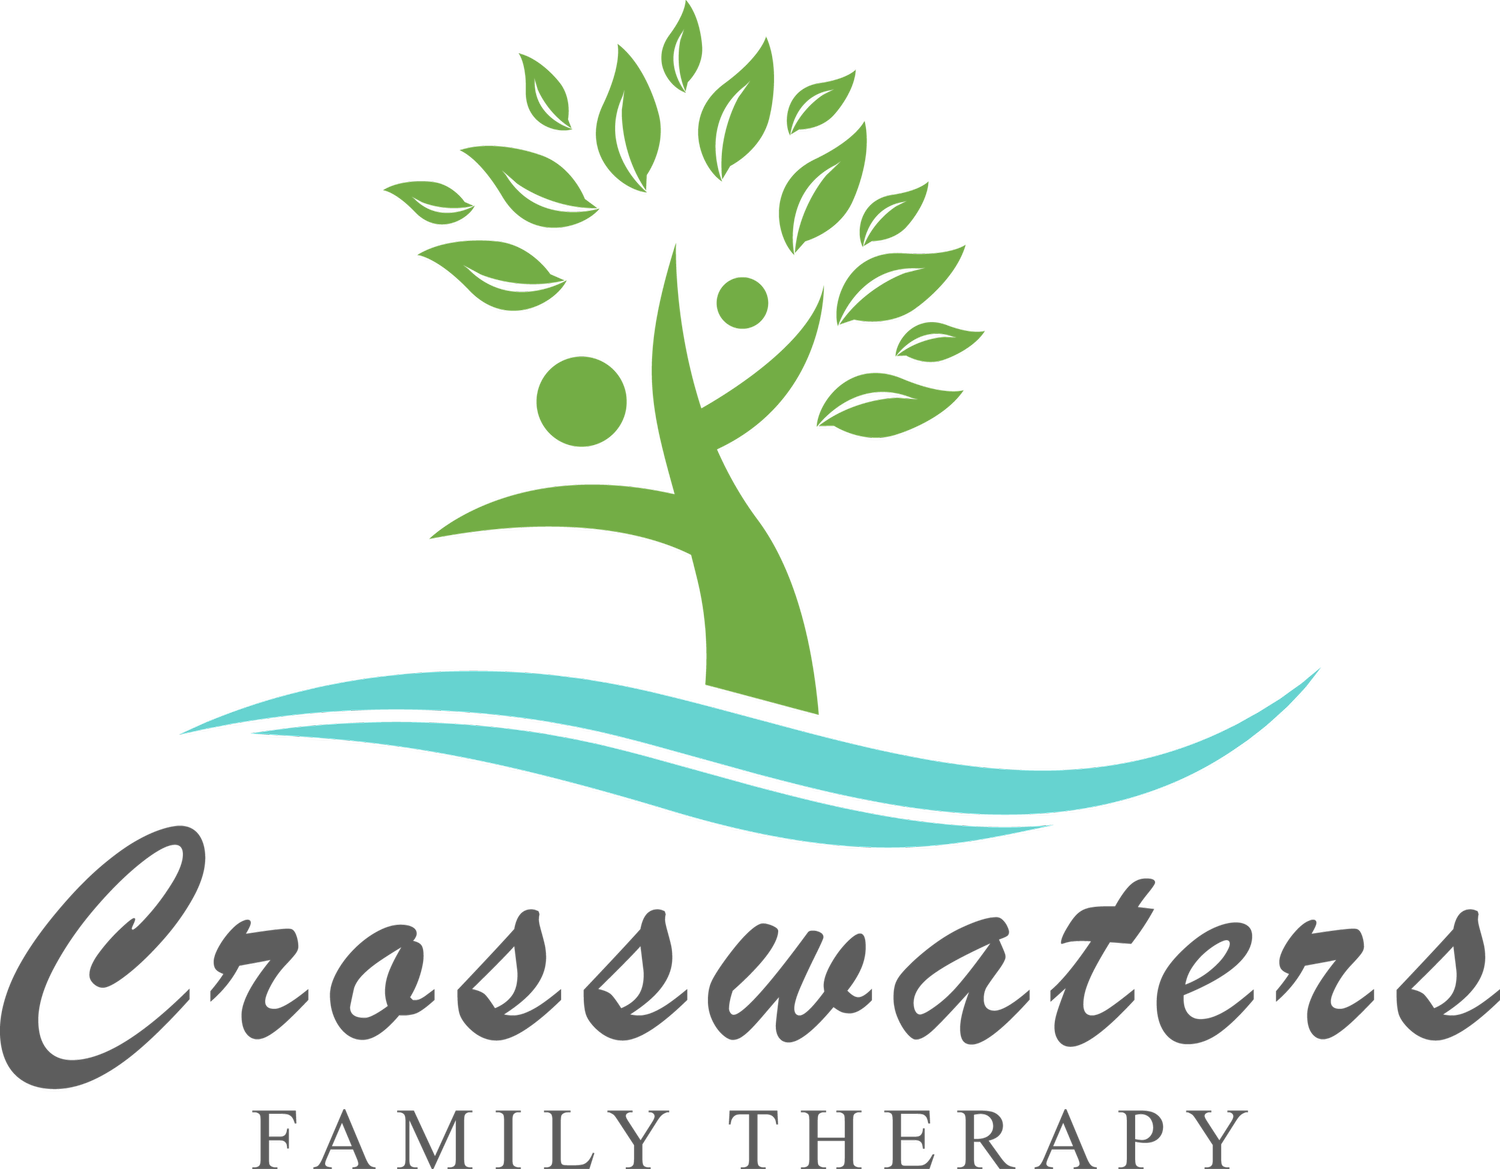 Crosswaters Family Therapy